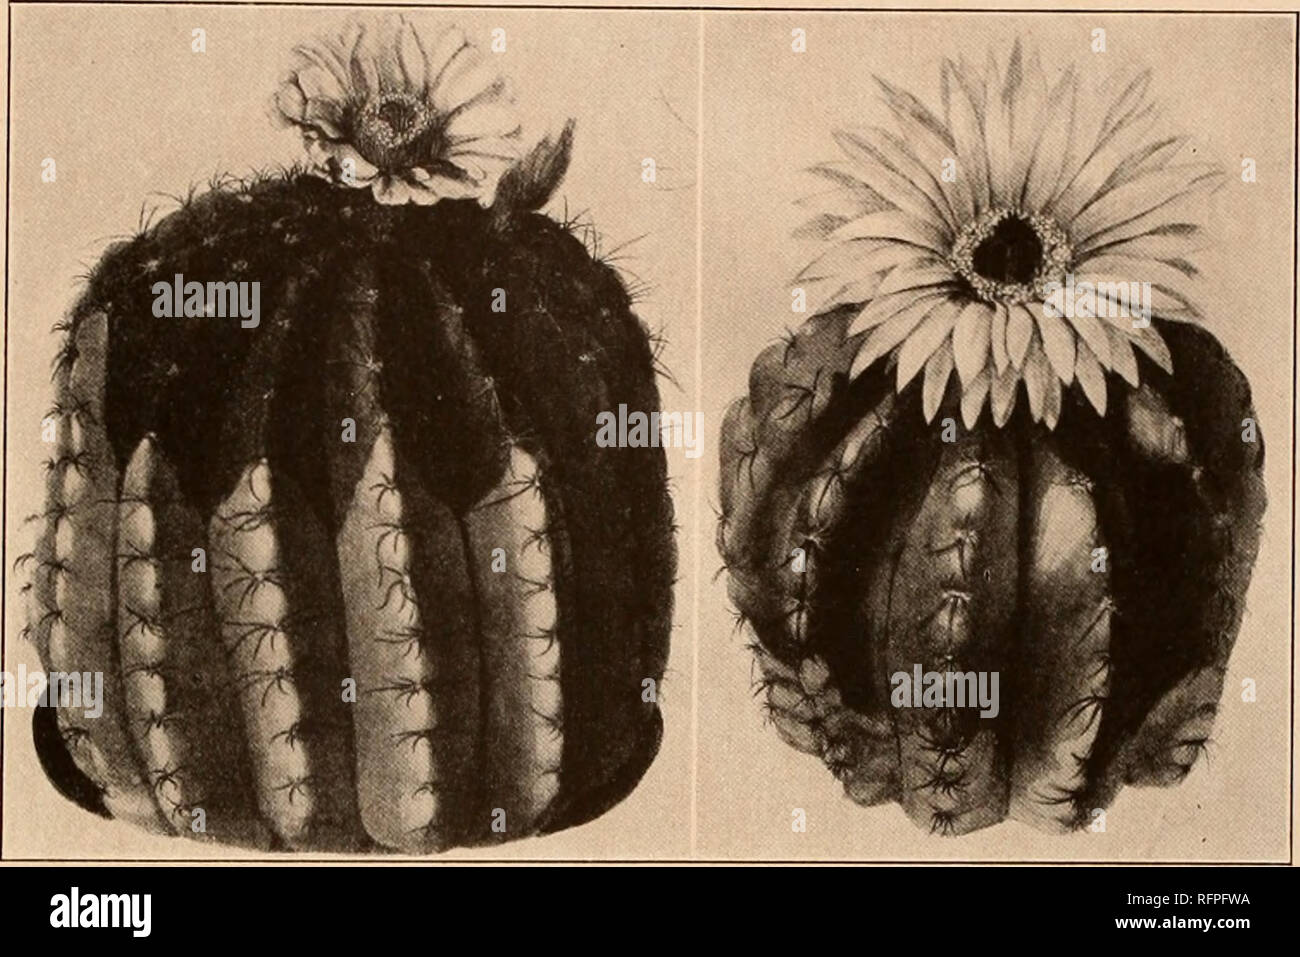 . Carnegie Institution of Washington publication. MALACOCARPUS. 195 We know this species from description and illustration only. Illustration: Martius, Fl. Bras. 42: pi. 50, f. 2, as Echinocactus muricatus. Figure 207 is copied from the illustration above cited. 13. Malacocarpus linkii (Lehmann). Cactus linkii Lehmann, Ind. Sem. Hamburg 16. 1827. Echinocactus linkii Pfeiffer, Enum. Cact. 48. 1837. Oval to short-eylindric, 7 to 15 cm. high; ribs 13, obtuse; areoles somewhat sunken into the ribs, 8 mm. apart; spines weak, spreading; radial spines 10 to 12, white with brownish tips; central spine Stock Photo